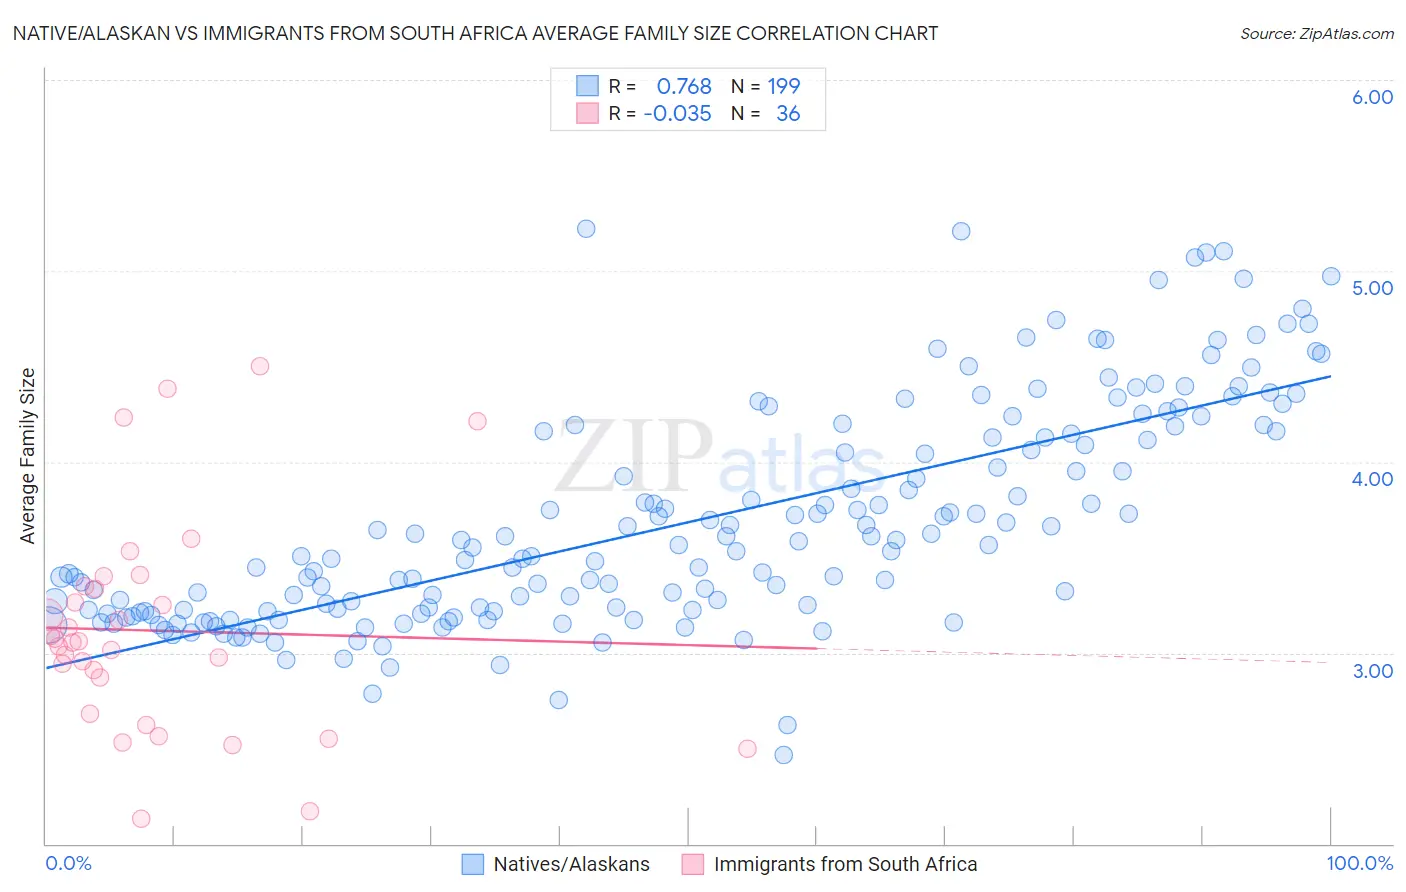 Native/Alaskan vs Immigrants from South Africa Average Family Size